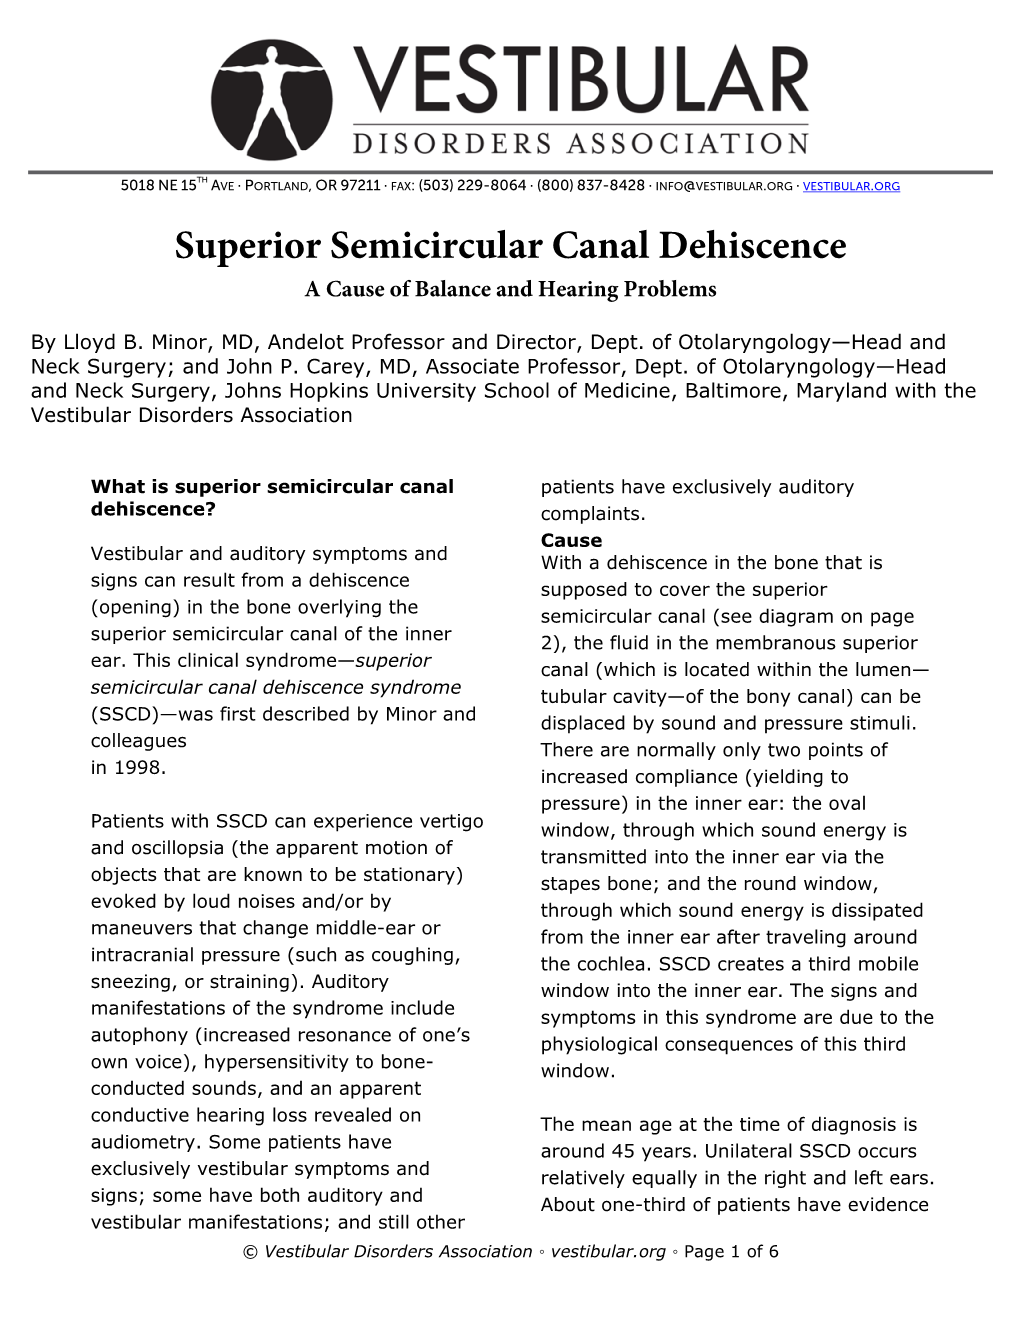 Superior Semicircular Canal Dehiscence (SSCD)